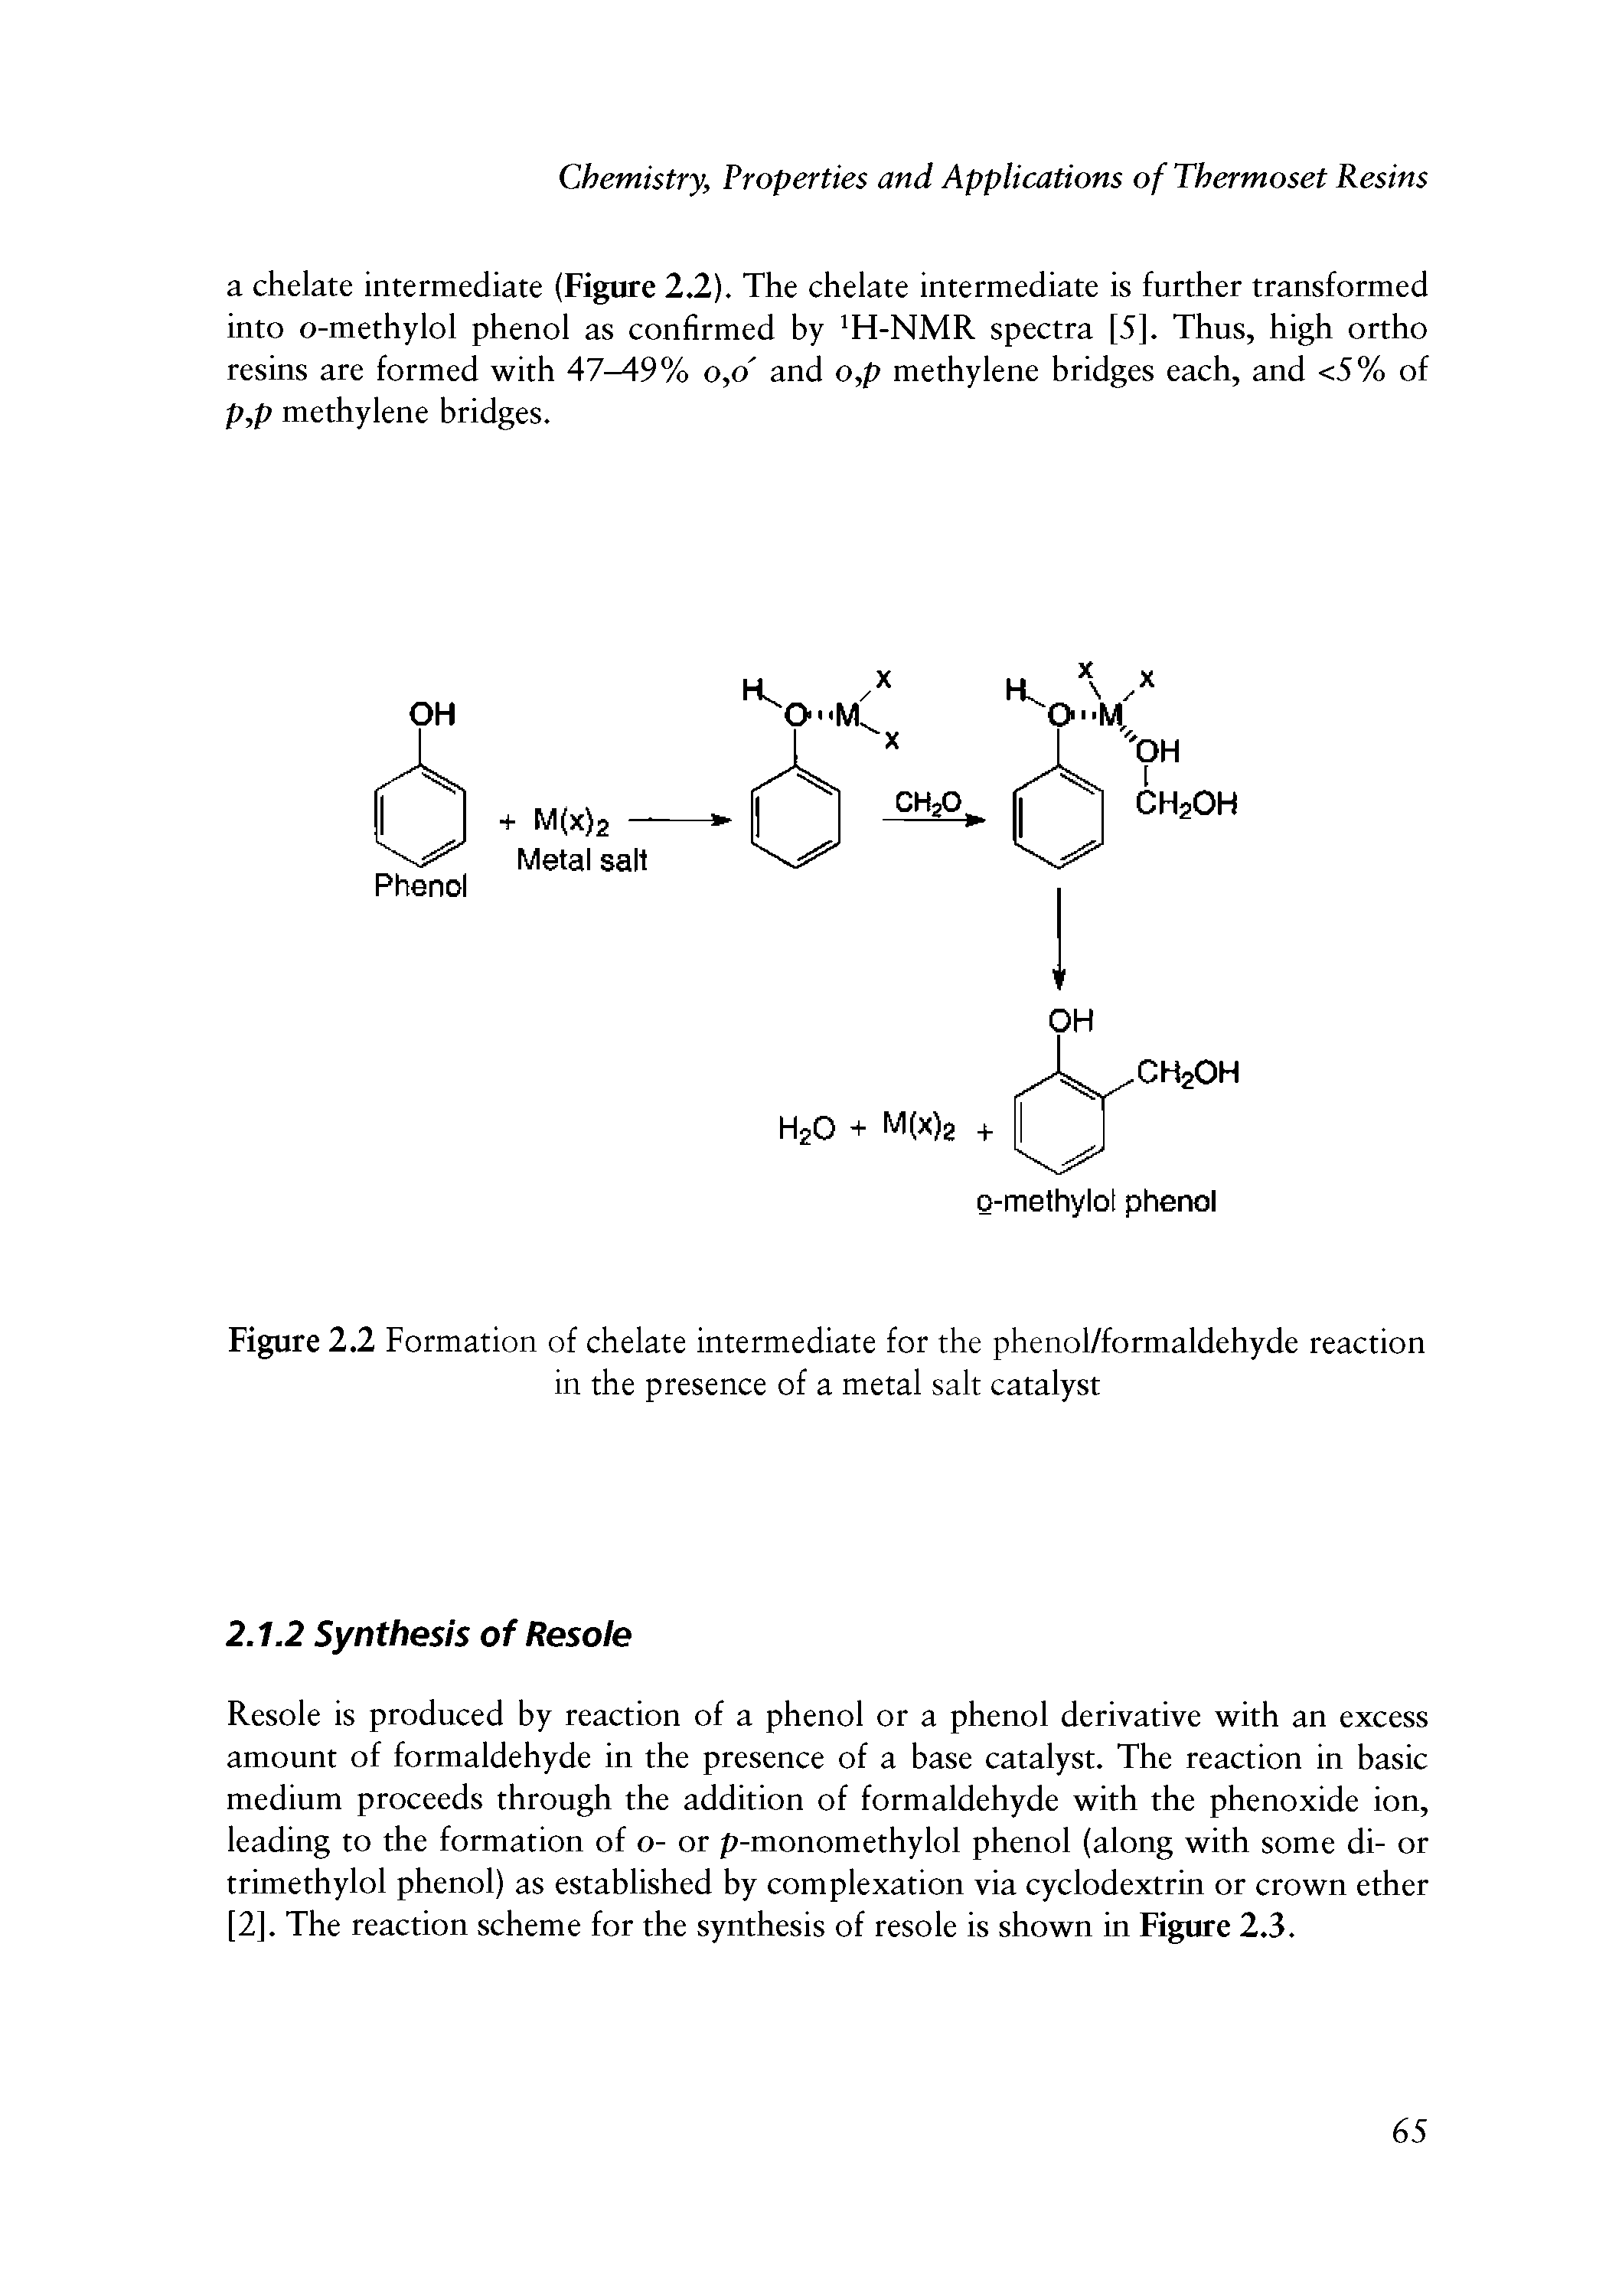 Figure 2.2 Formation of chelate intermediate for the phenol/formaldehyde reaction in the presence of a metal salt catalyst...